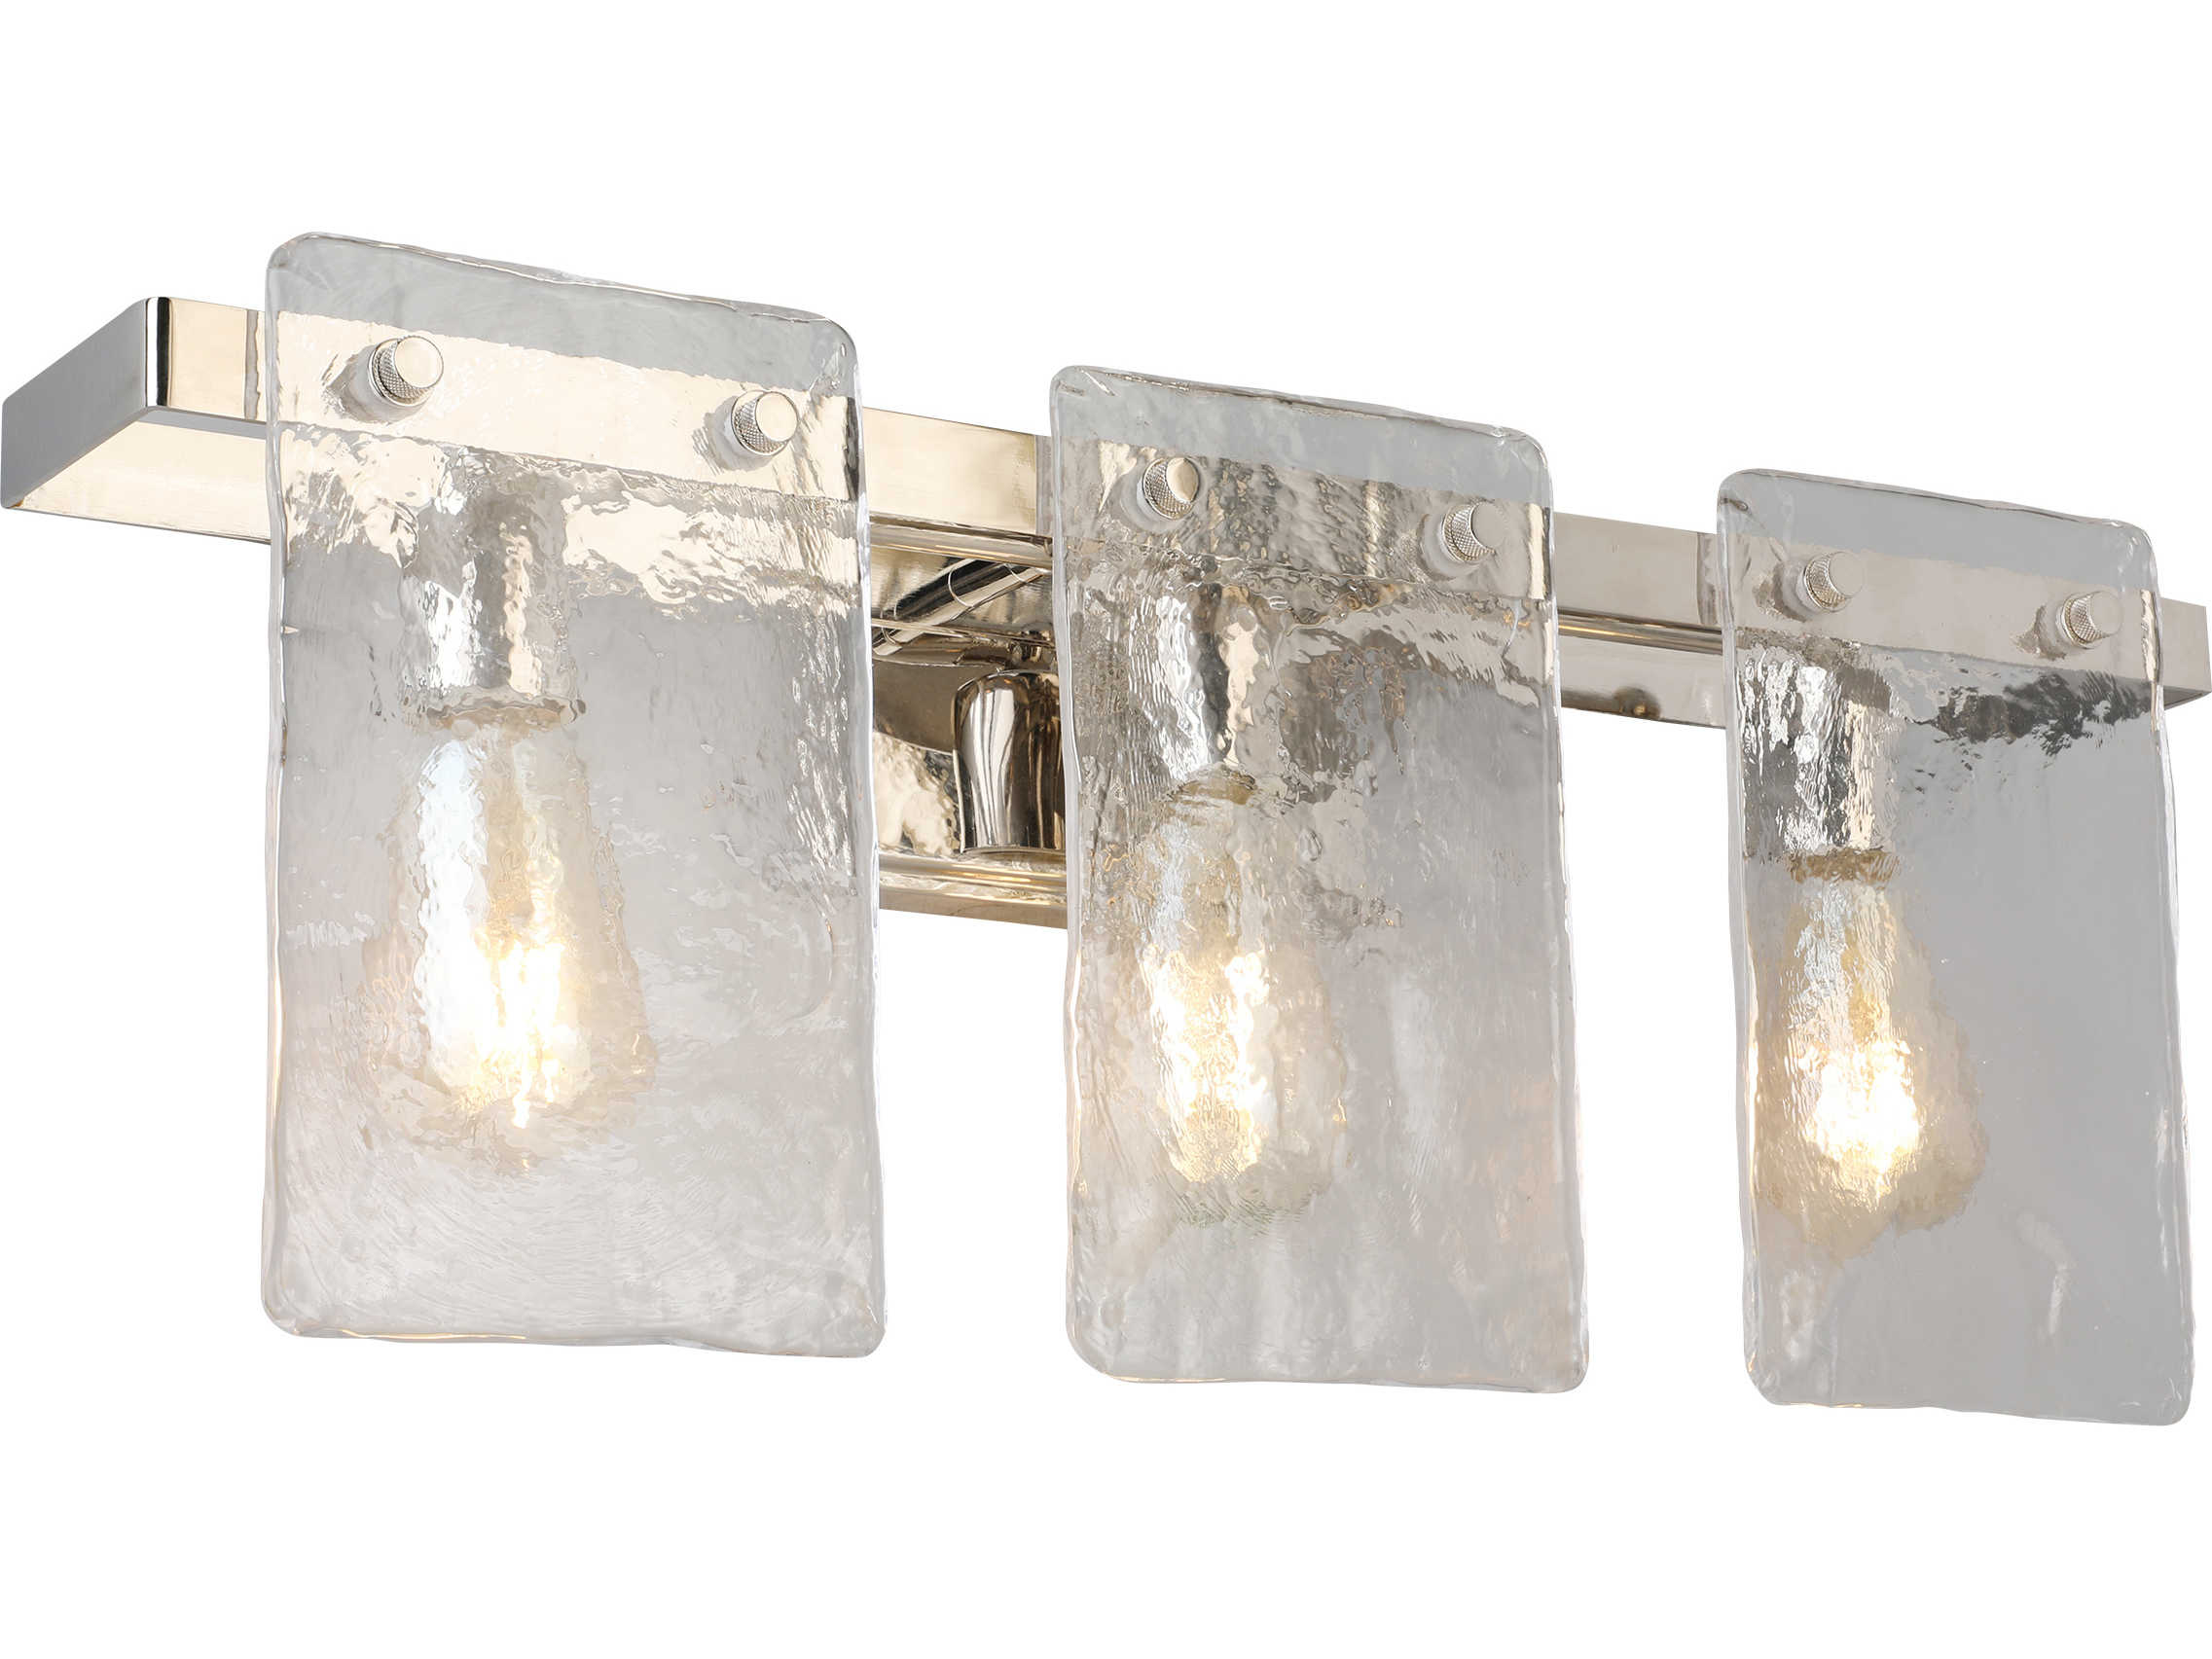 Eglo Wolter Polished Nickel 3 Light Glass Vanity Light Egl203993a